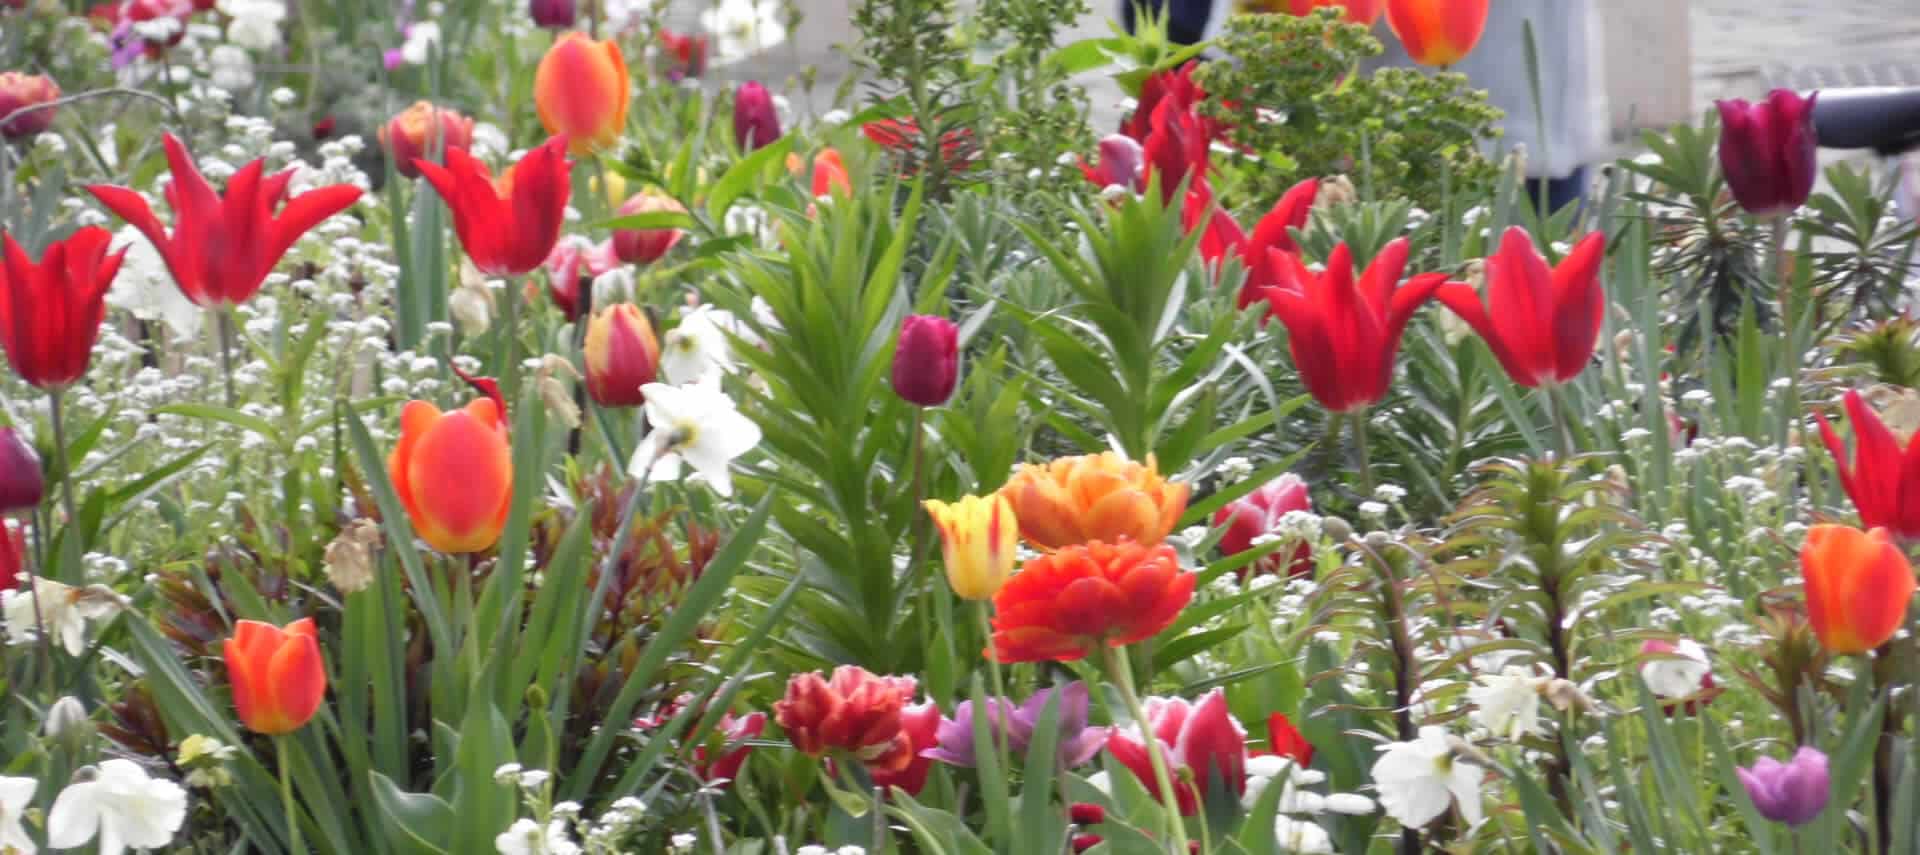 Masses of colorful red and orange flowers in a garden.